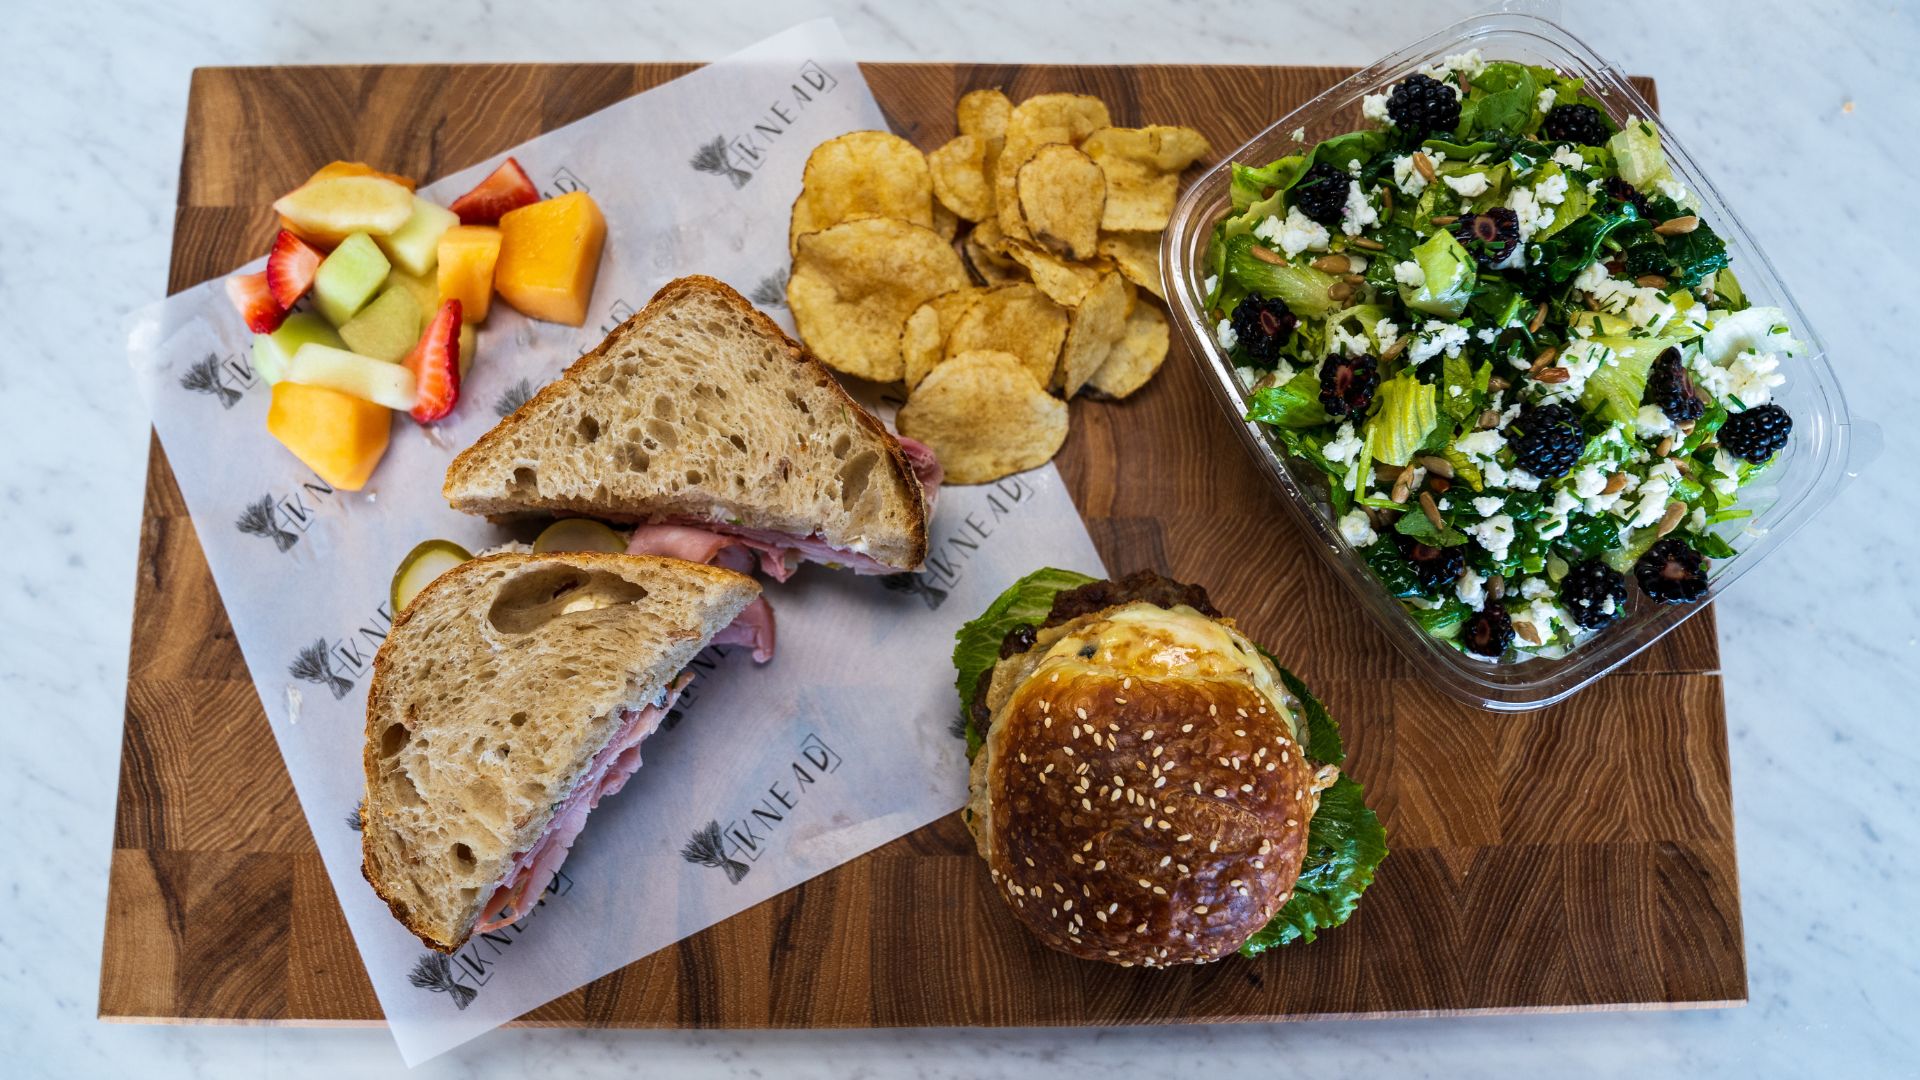 Knead Bakehouse + Provisions serves sandwiches on sourdough alongside salads, chips and fruit.